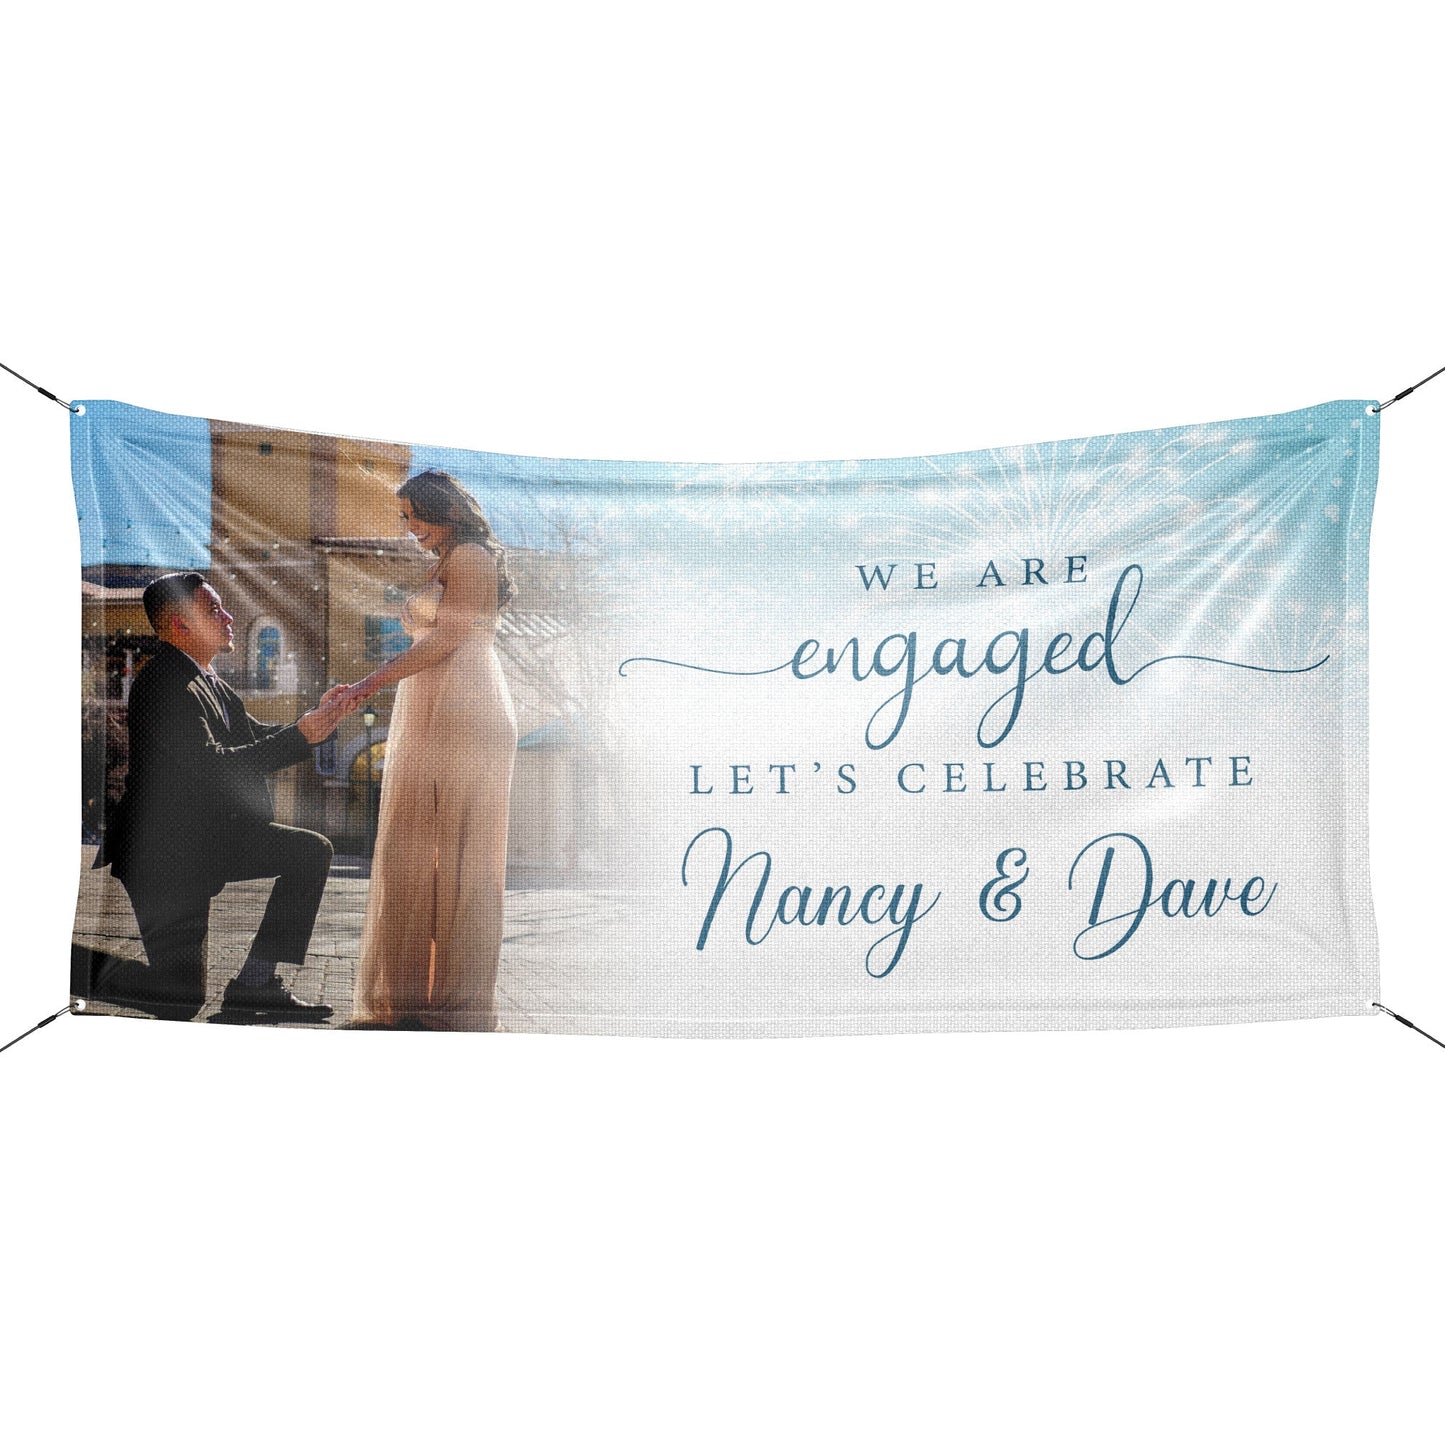 Personalized Fireworks Engagement Banner